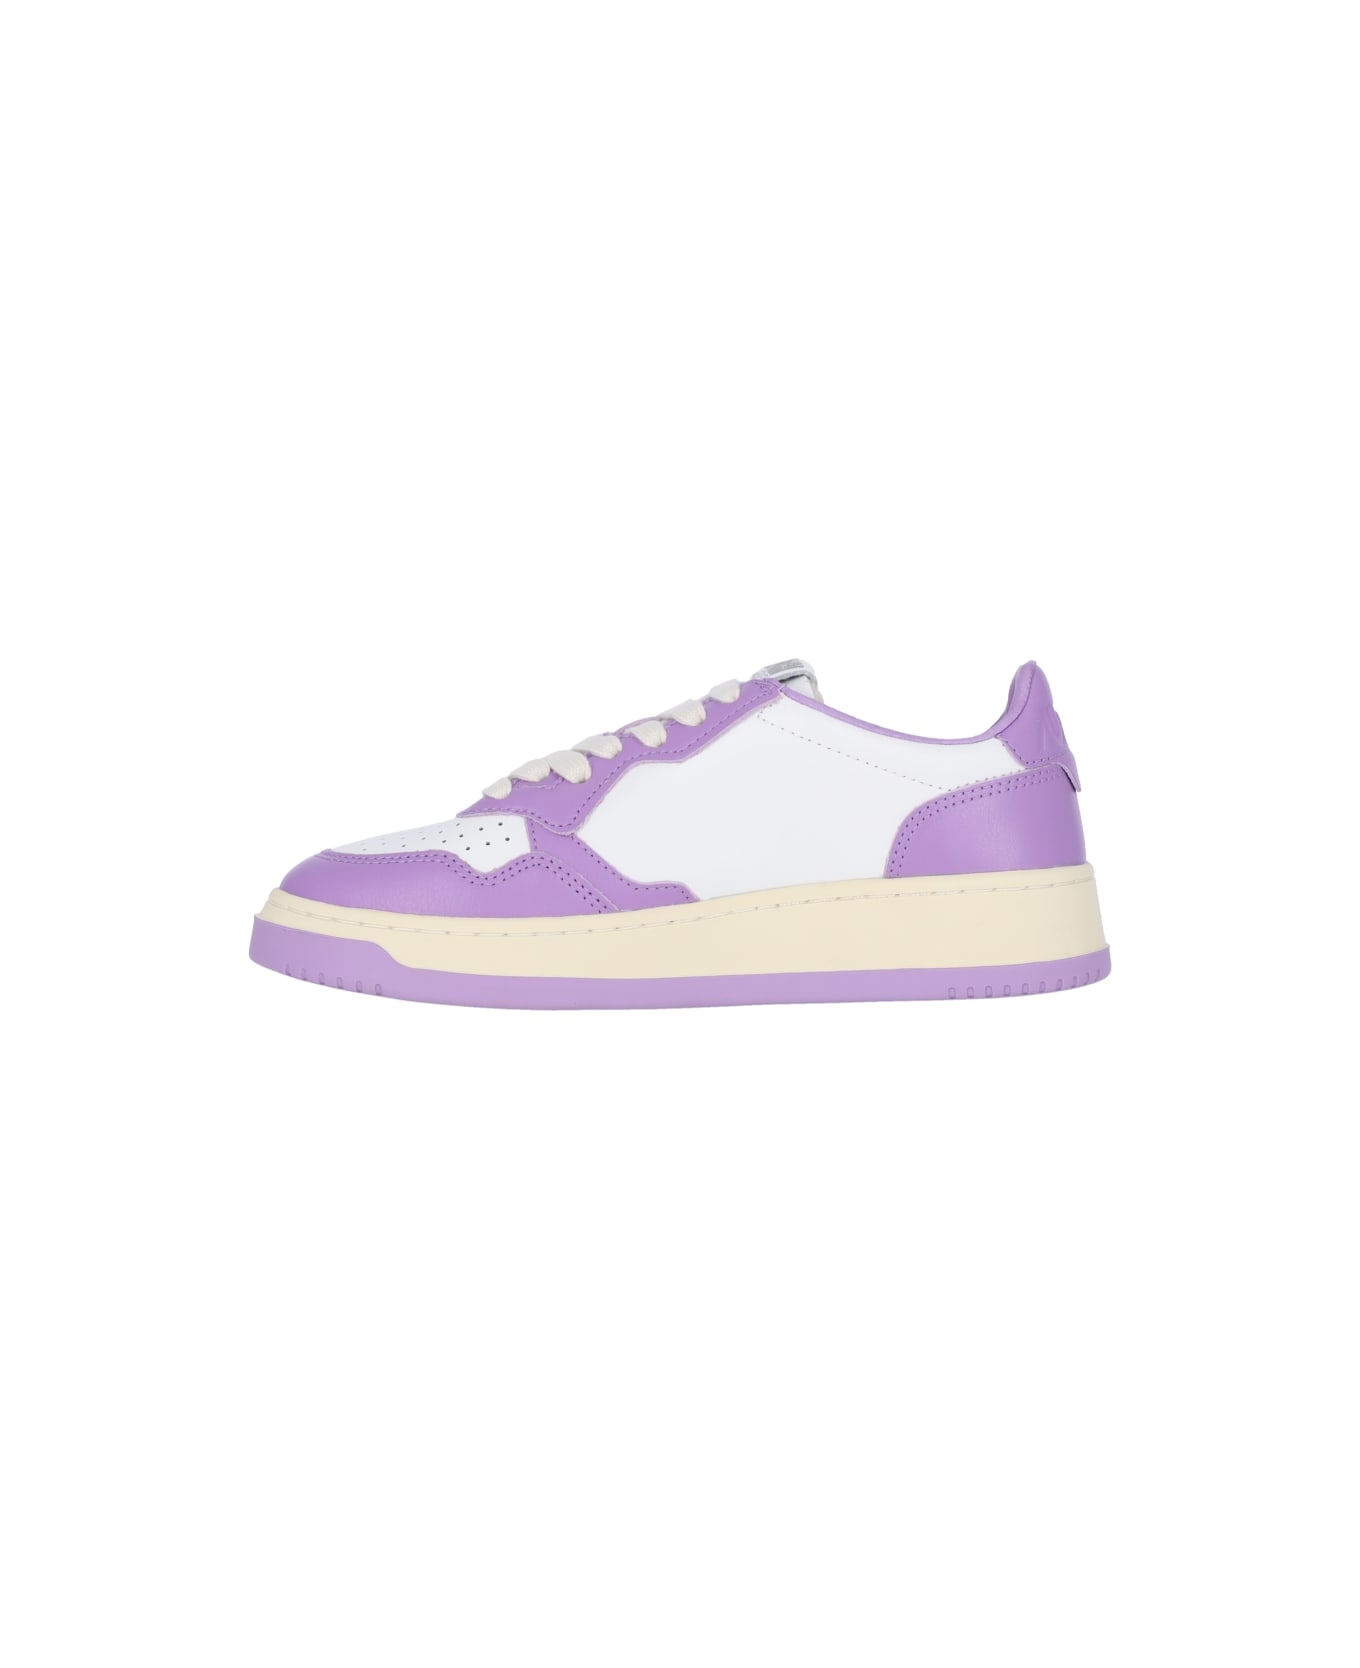 Autry Medialist Low Sneakers In White/purple Two-tone Leather - Violet スニーカー